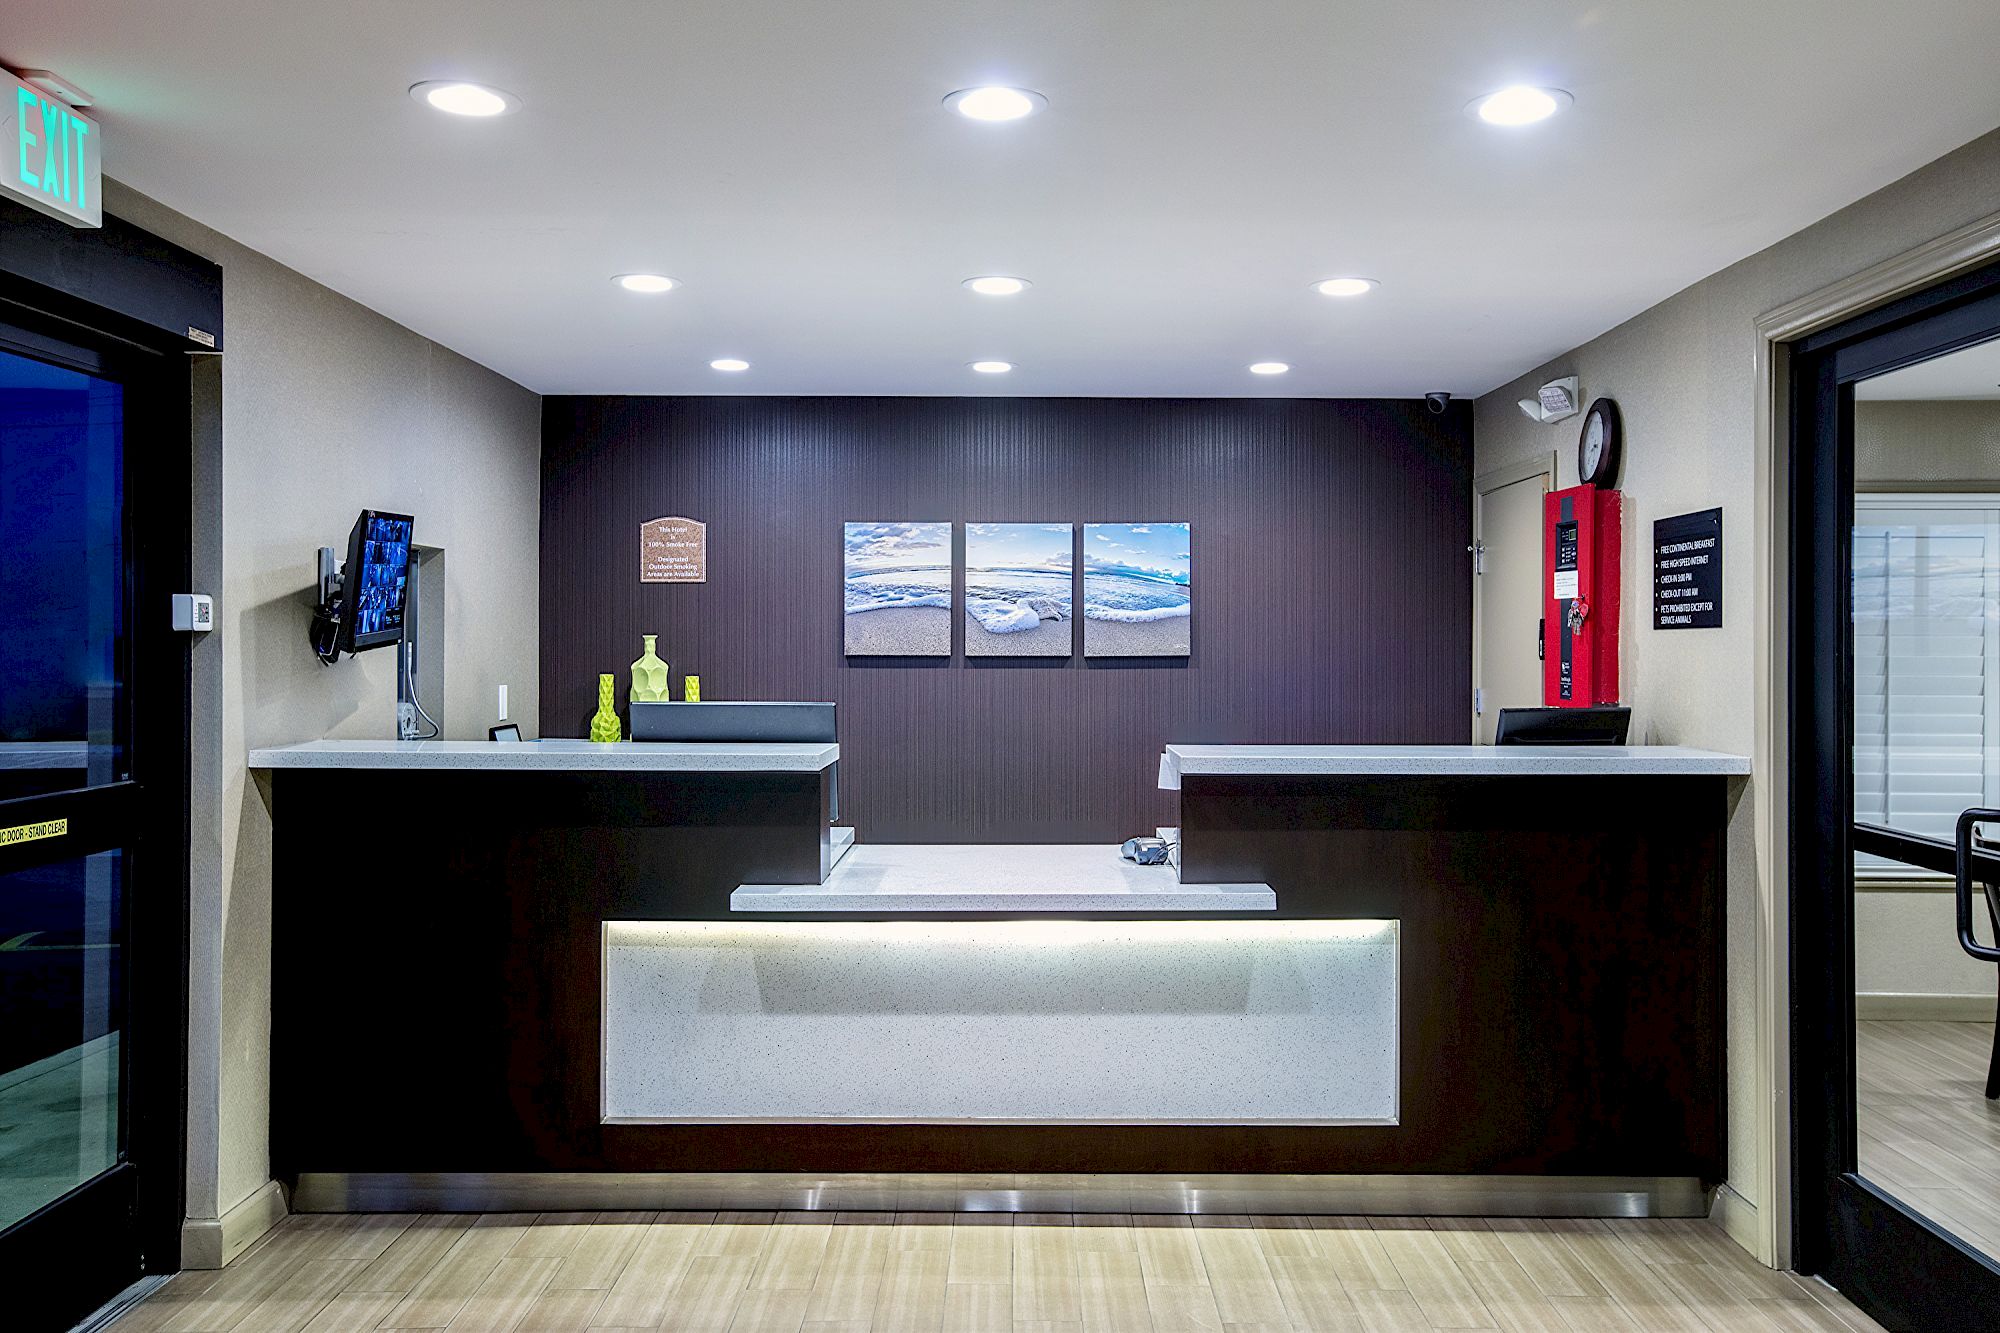 A modern reception desk area with a dark backdrop featuring three wall pictures, illuminated from above, and minimalistic decor.